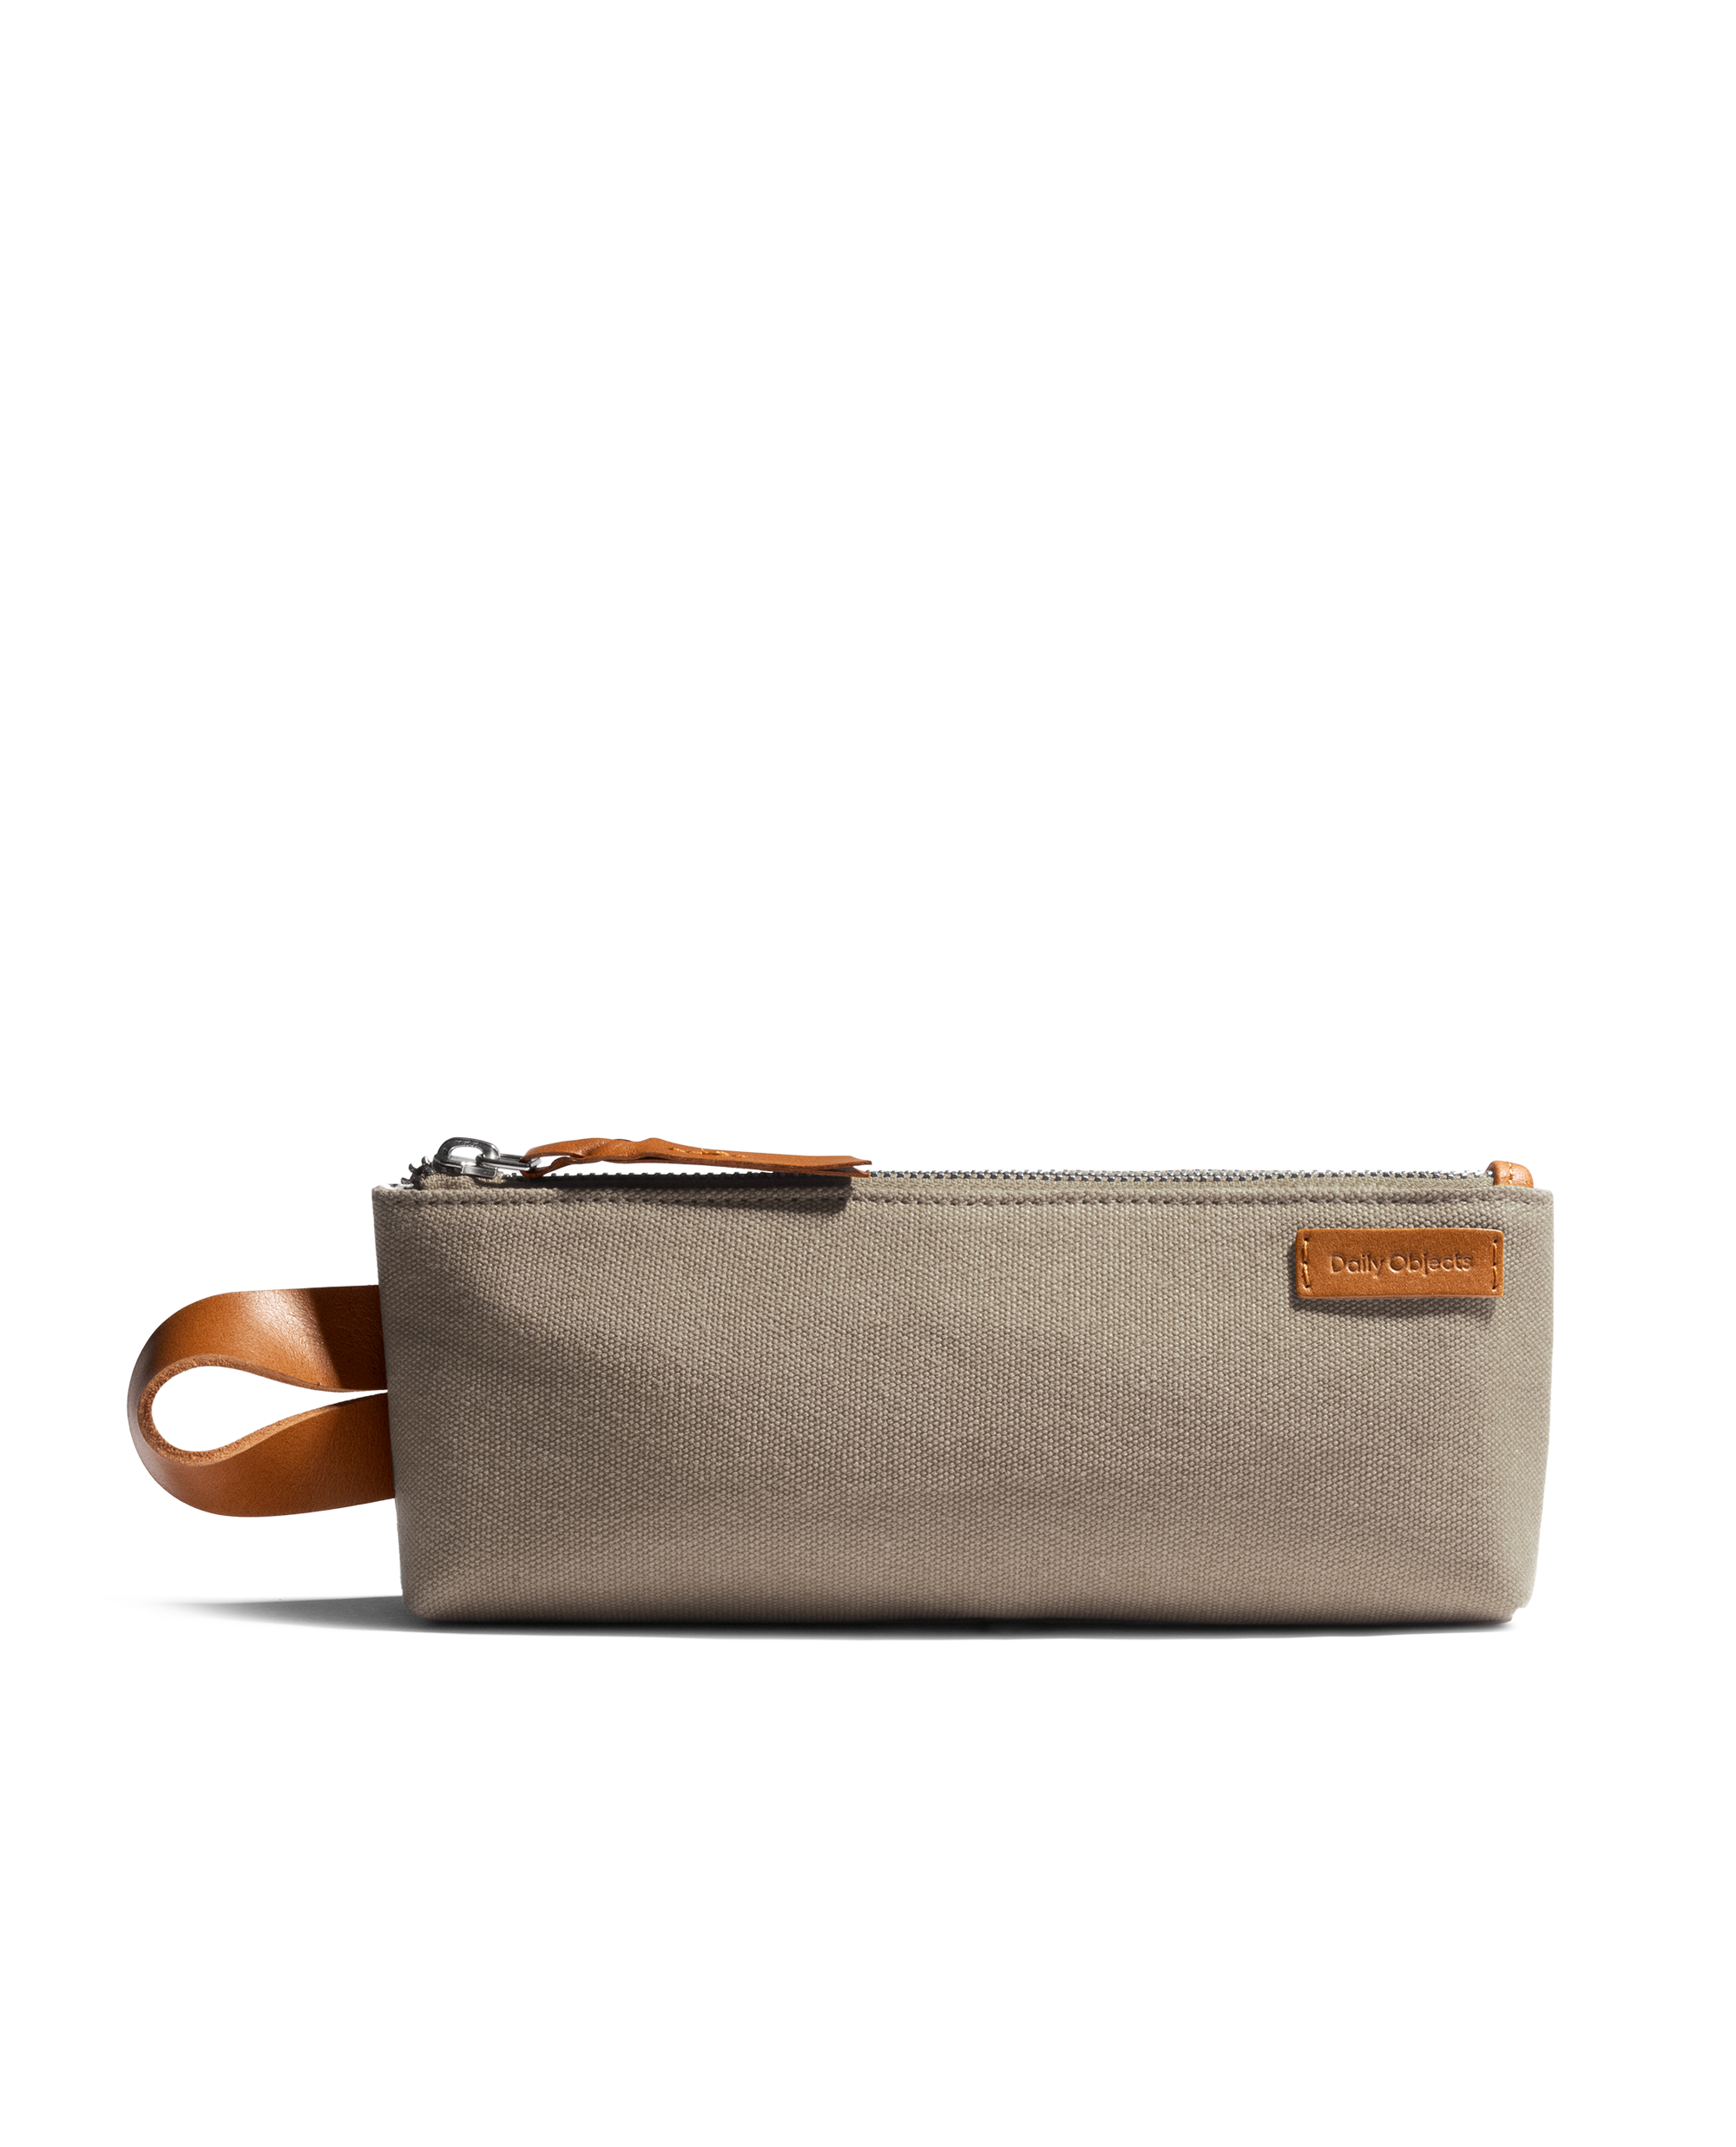 Zipper Pouch | Leather Bags for Women | Urban Southern